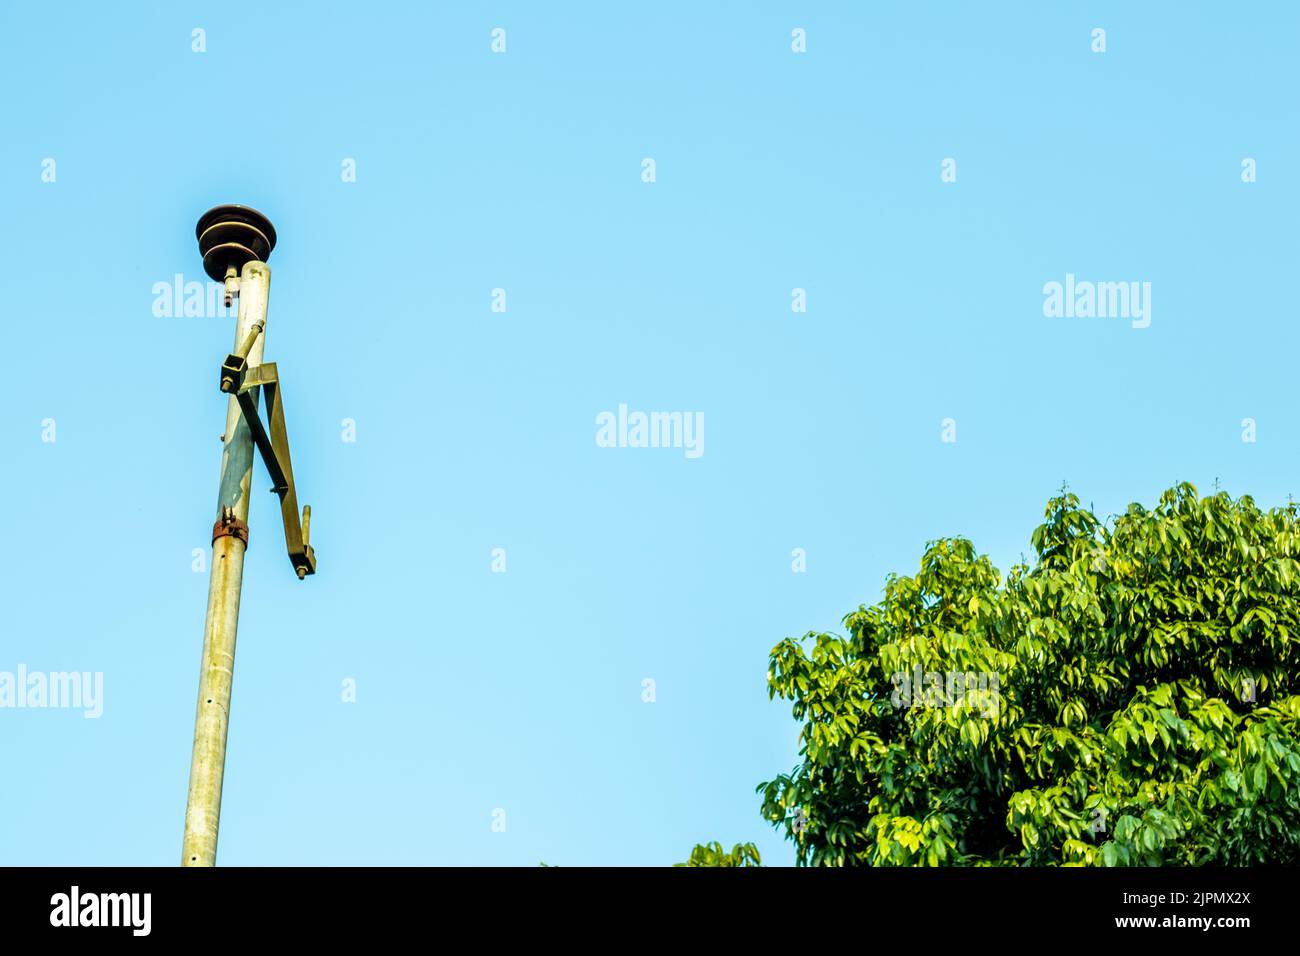 Litchi tree leaves and branches and abandoned electricity pole on blue sky background Stock Photo